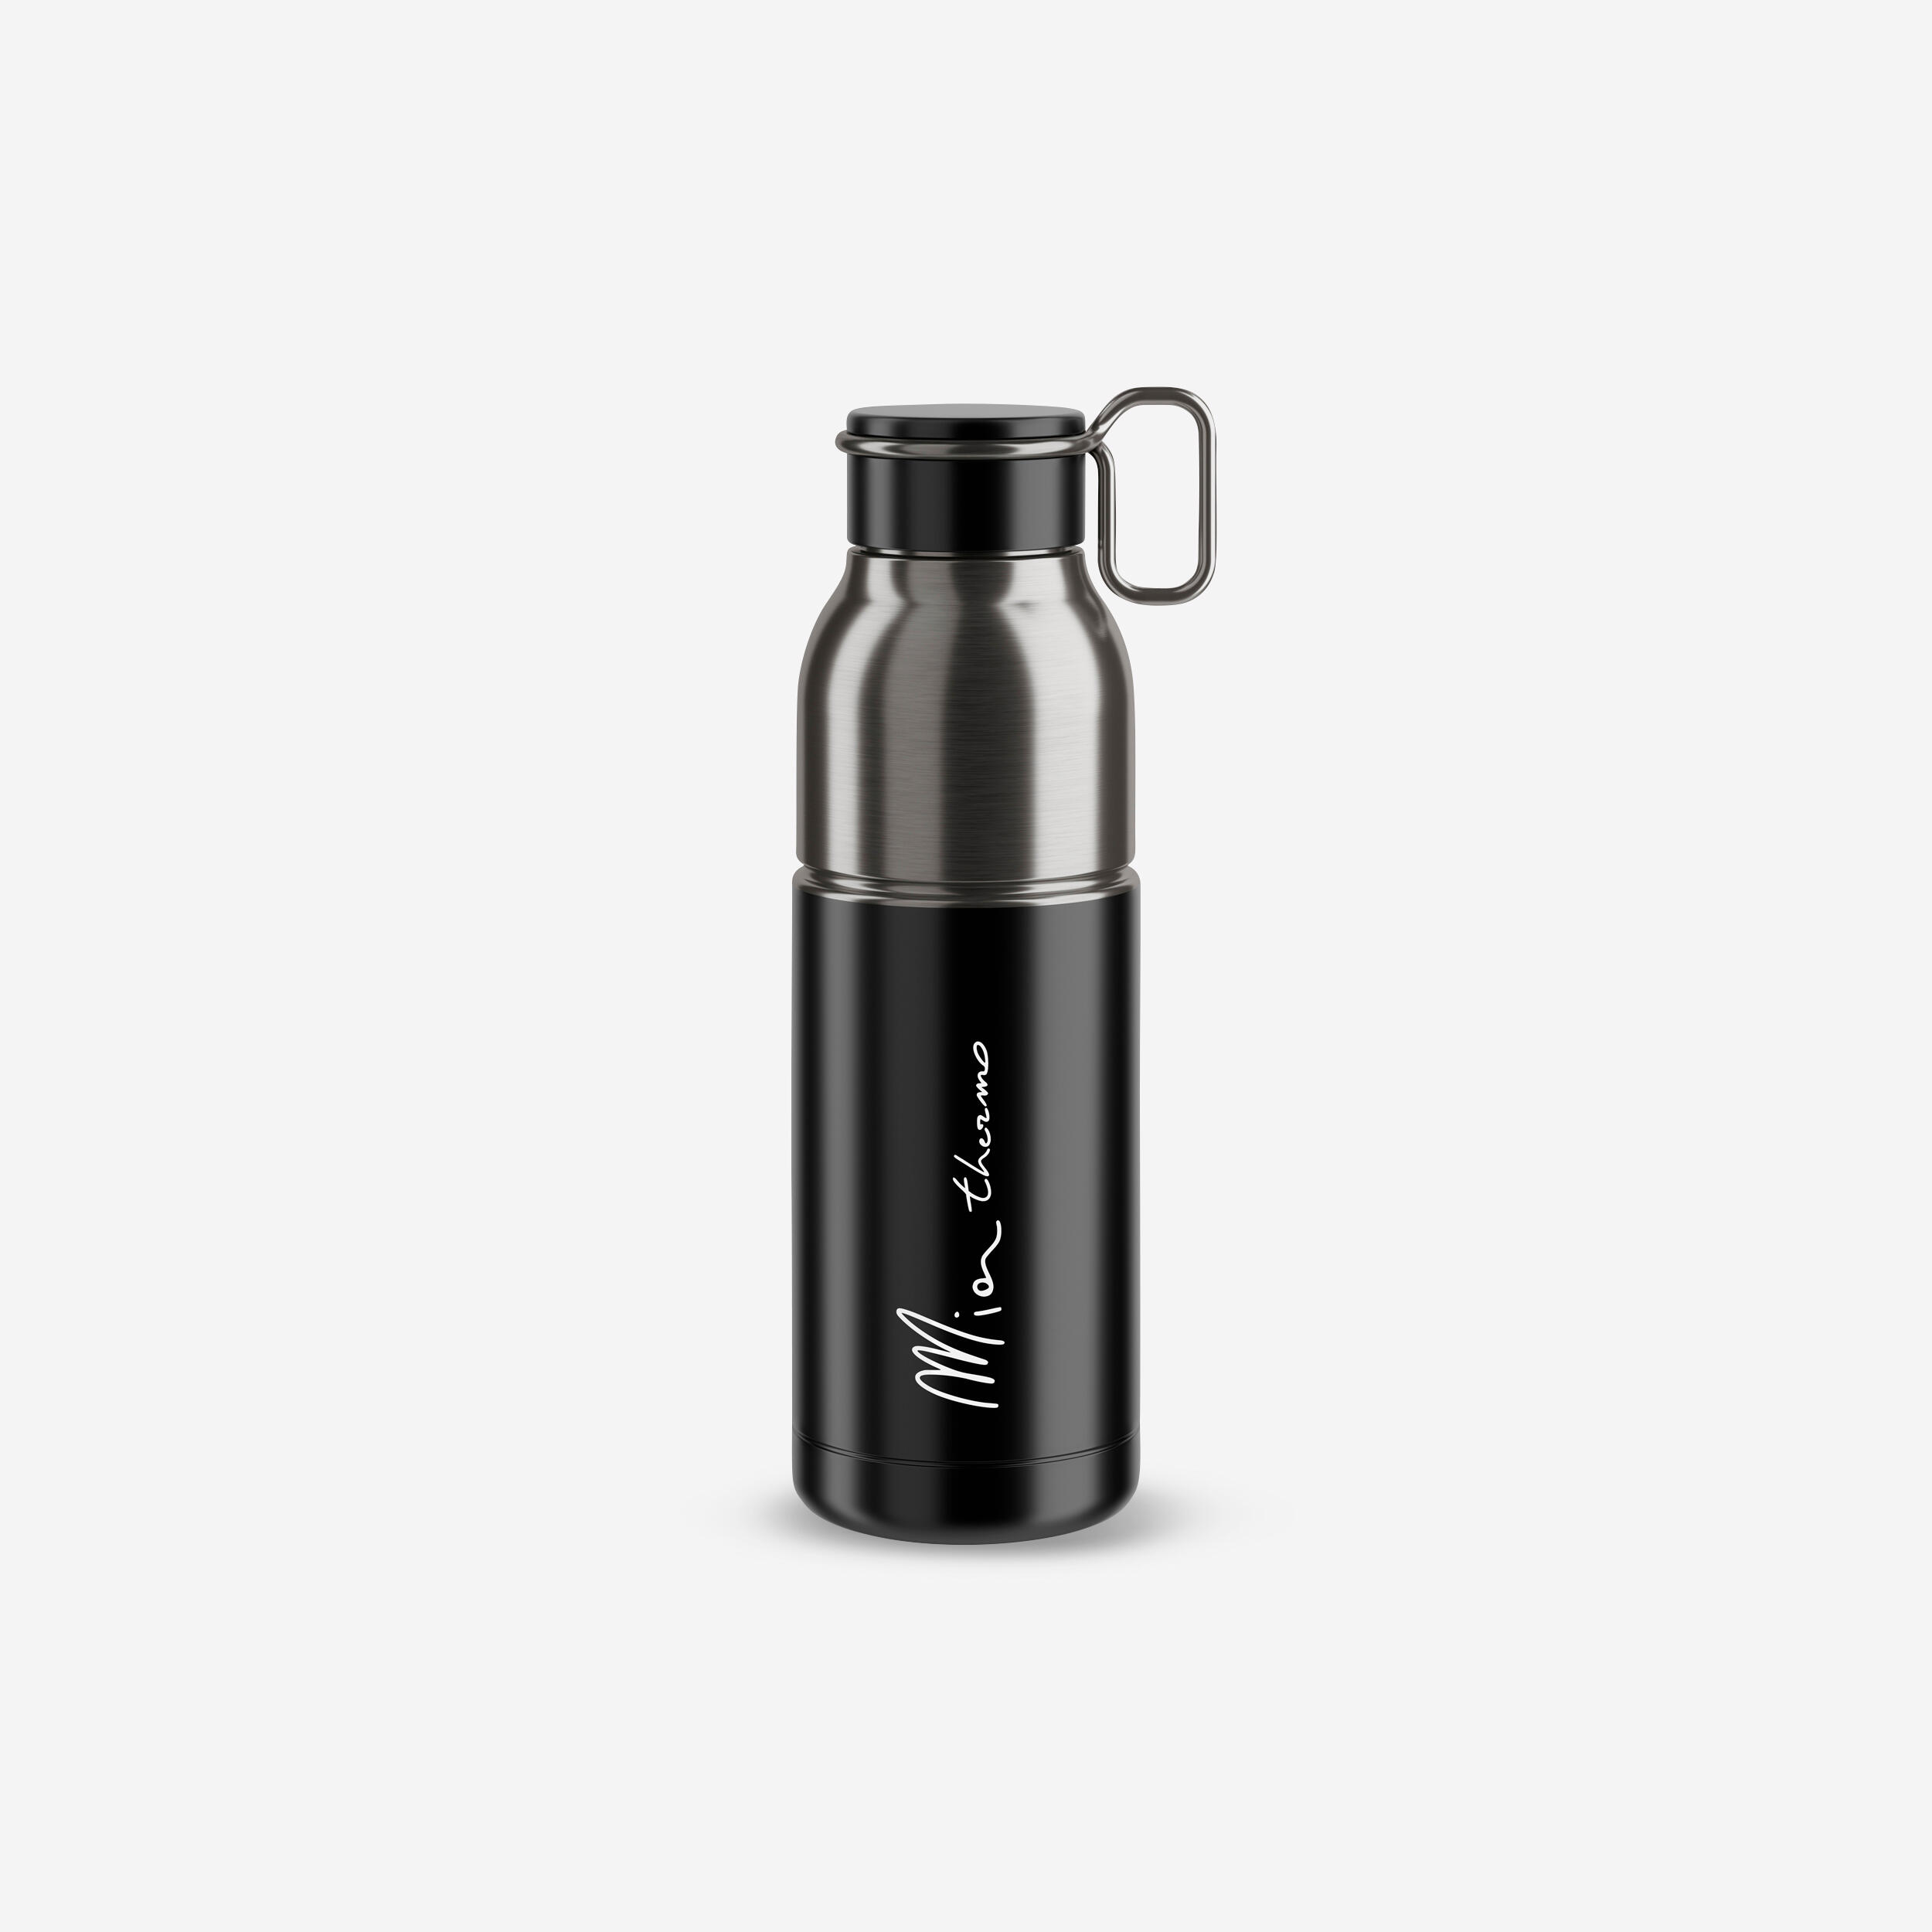 Isothermal Stainless Steel Cycling Water Bottle 550 ml Mia Thermo - Black 1/4